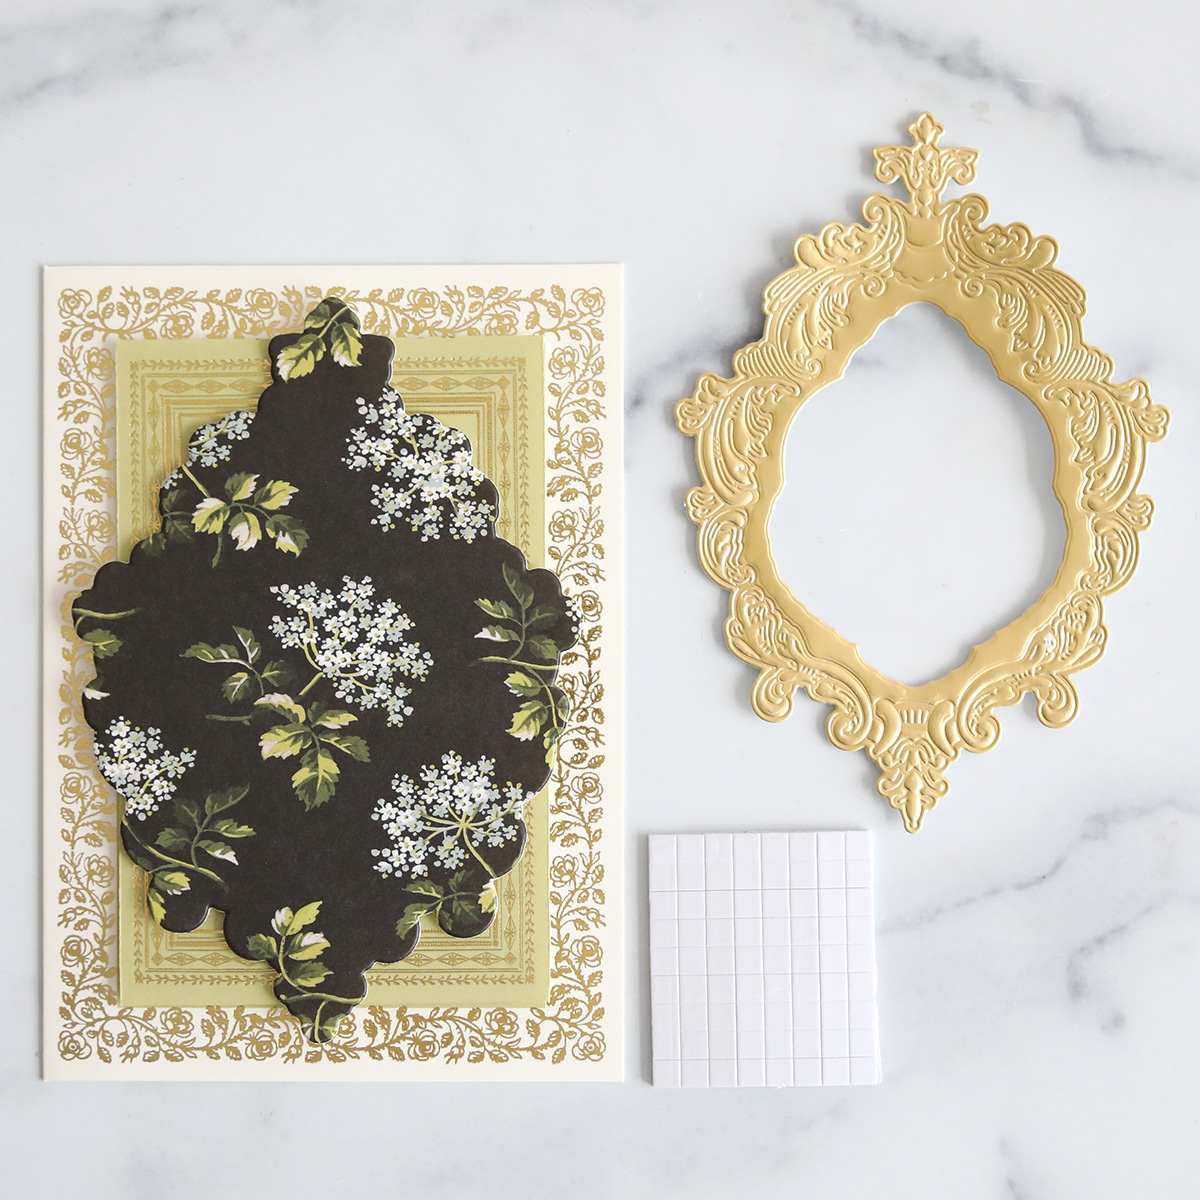 A gold frame with flowers and a notepad on a marble table.